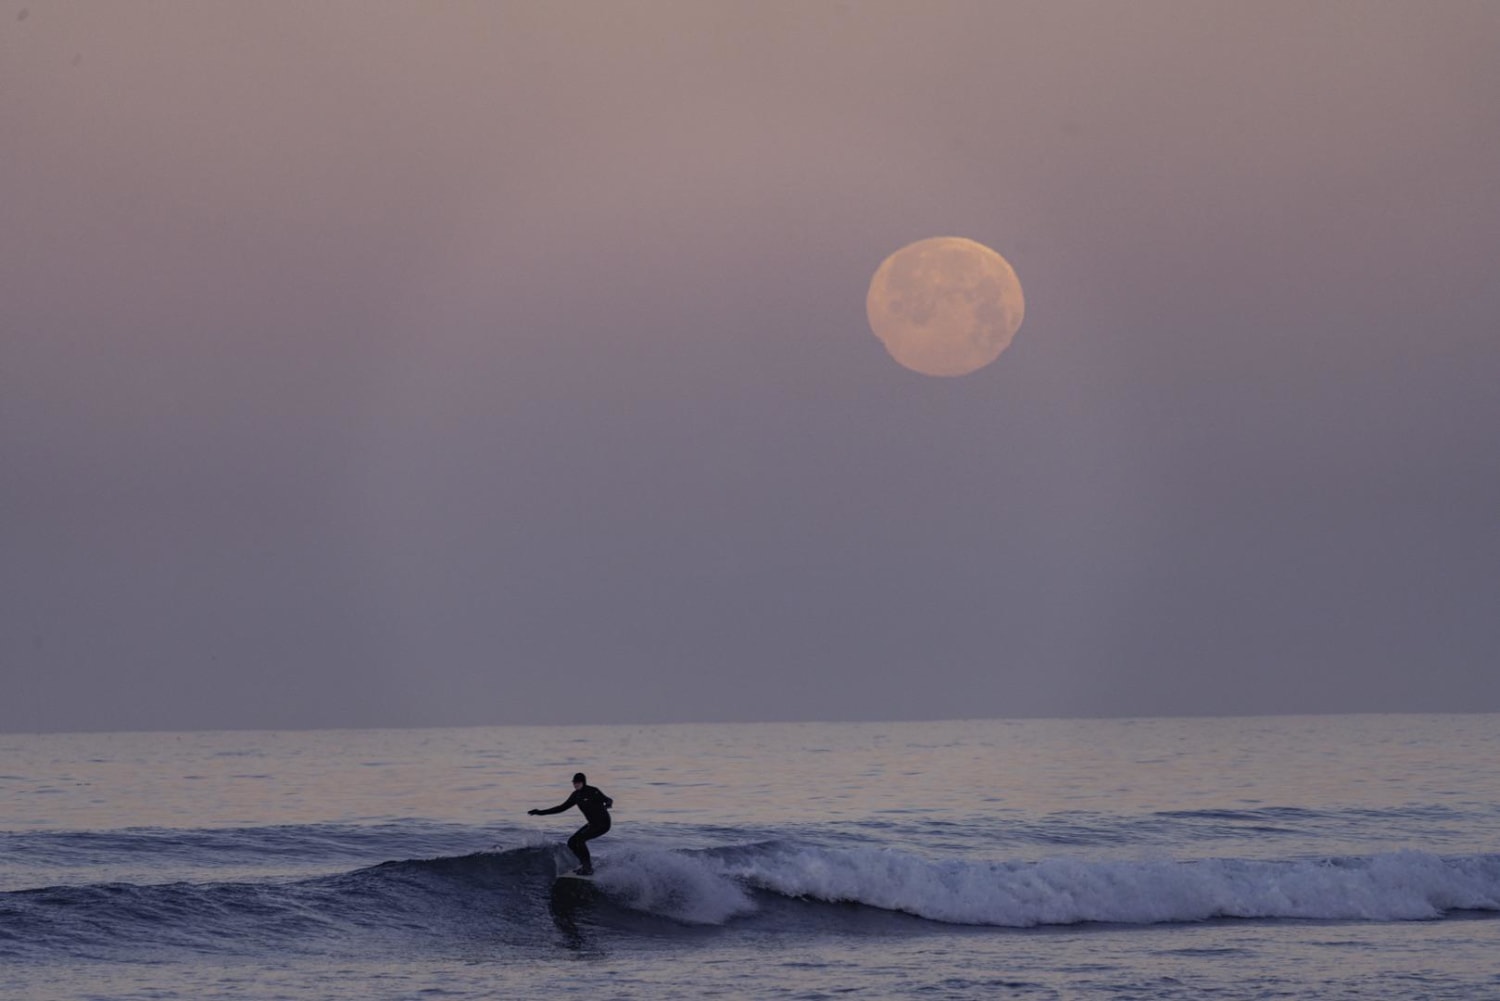 ITAP surfing with full moon